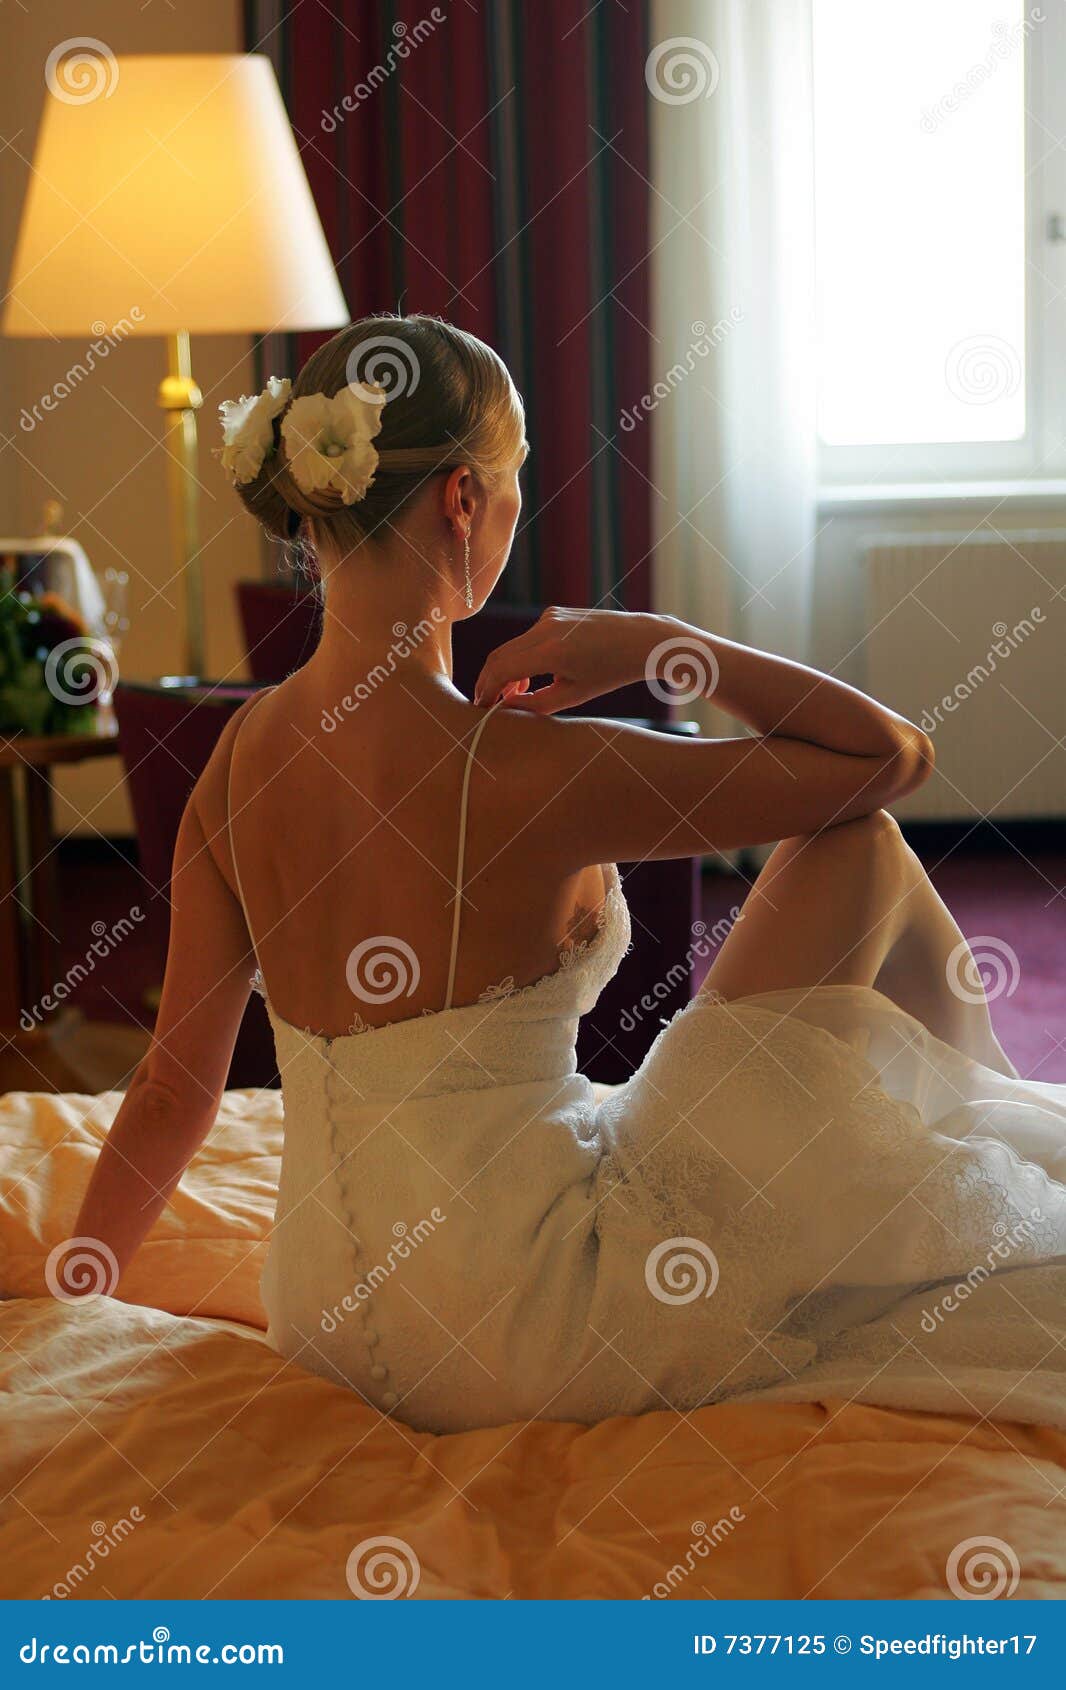 bride sat on bed rear view